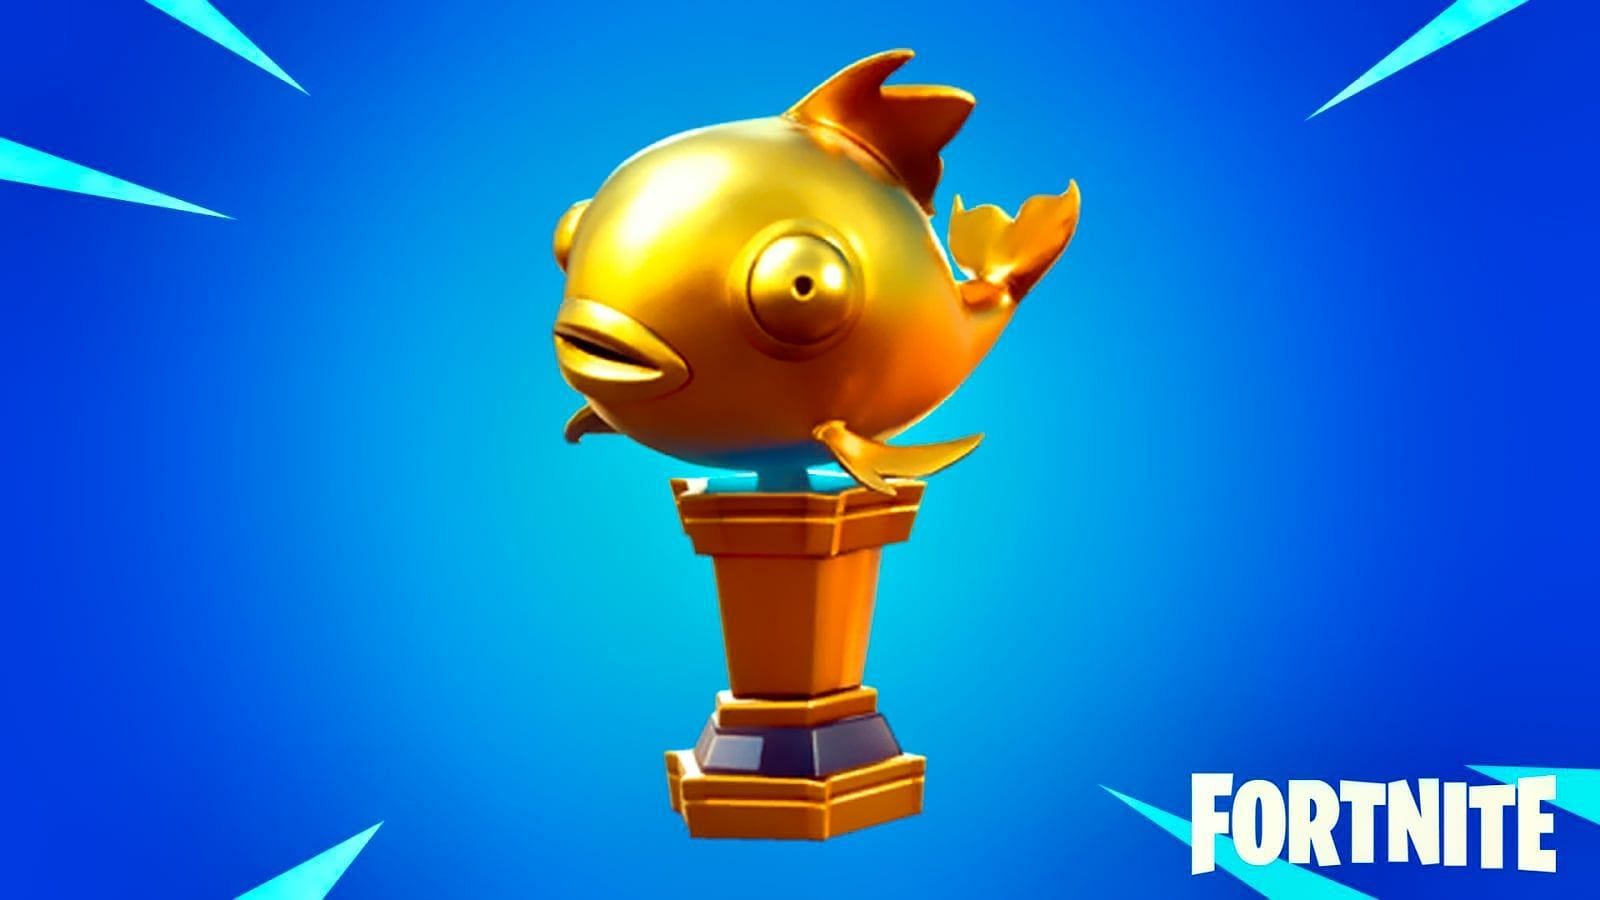 The mythic goldfish is still present in Chapter 2 Season 8 of Fortnite but chances of finding one are pretty low (Image via Epic Games)